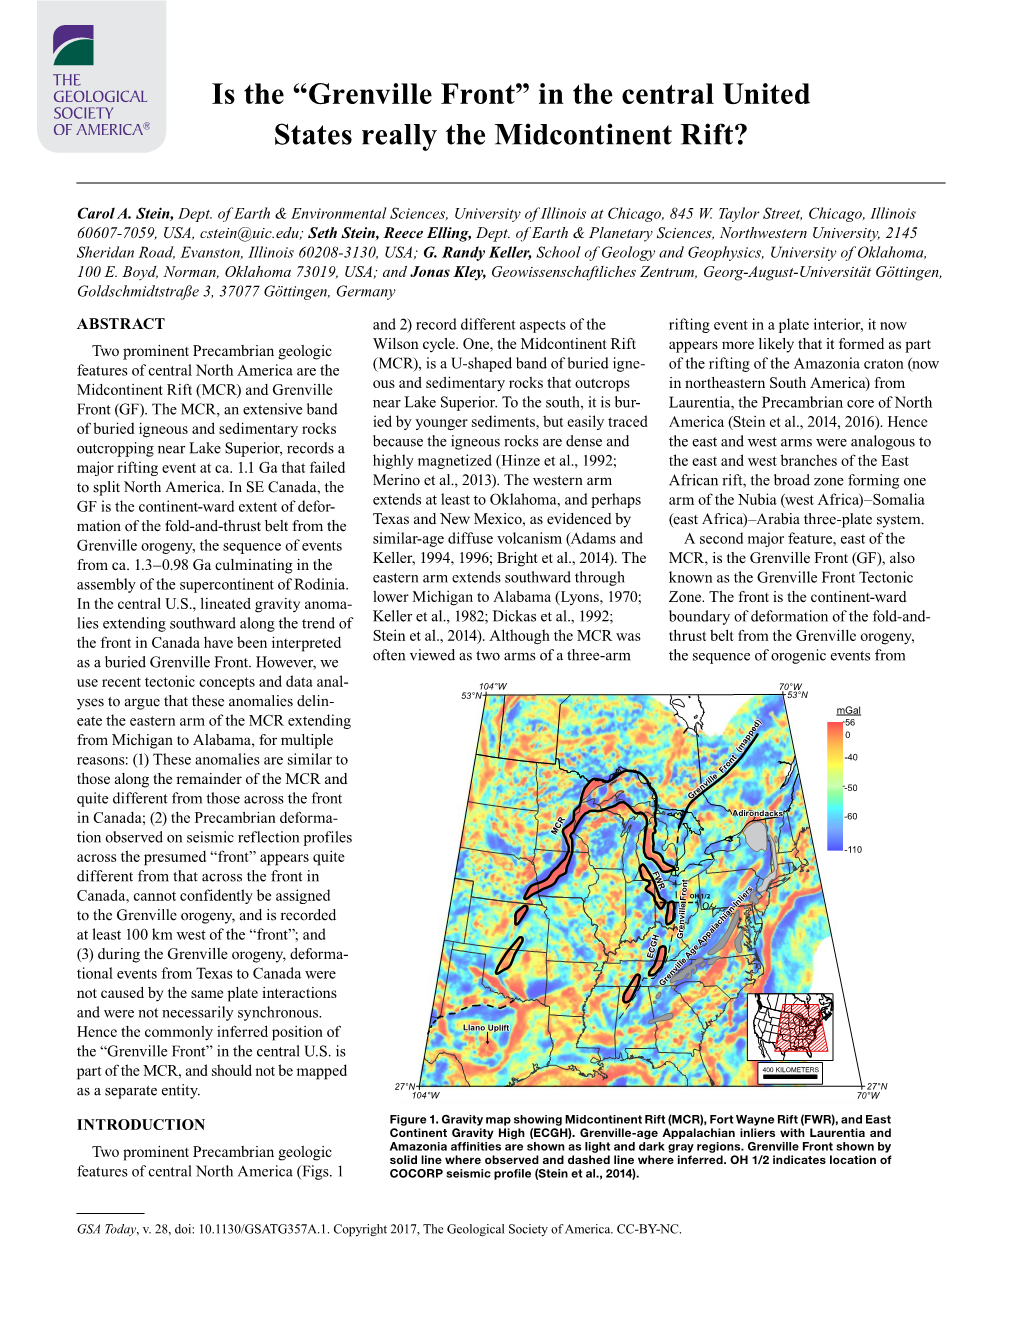 Grenville Front” in the Central United States Really the Midcontinent Rift?